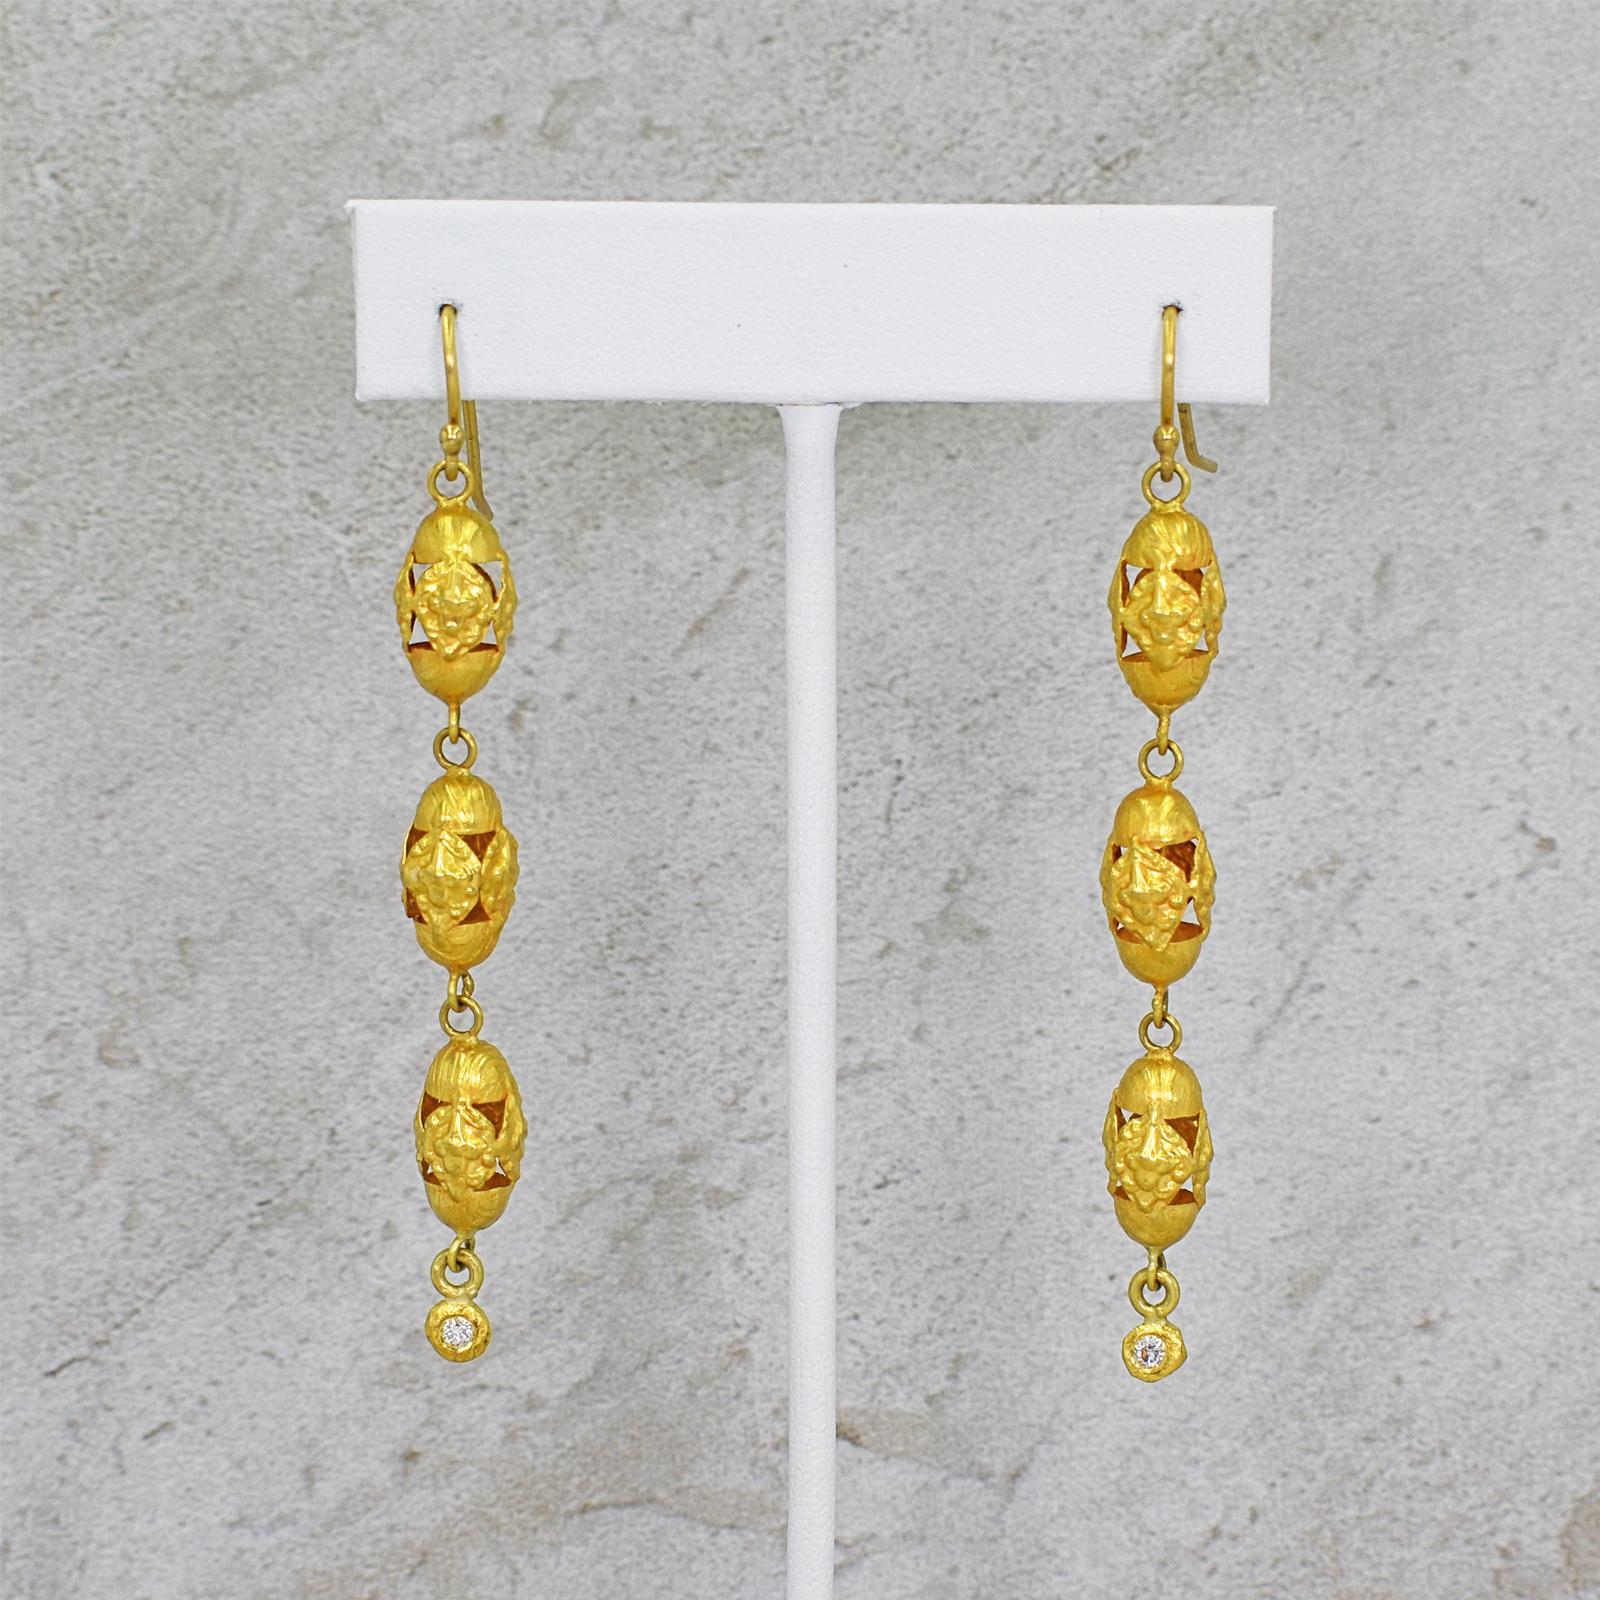 White Diamond charms (0.12 total carat weight, G-H, SI1) on 22k yellow gold three tier vintage filigree beads and French wire dangle earrings. Dangle earrings are 3 inches in total length, and come with silicone backs for added comfort, support and